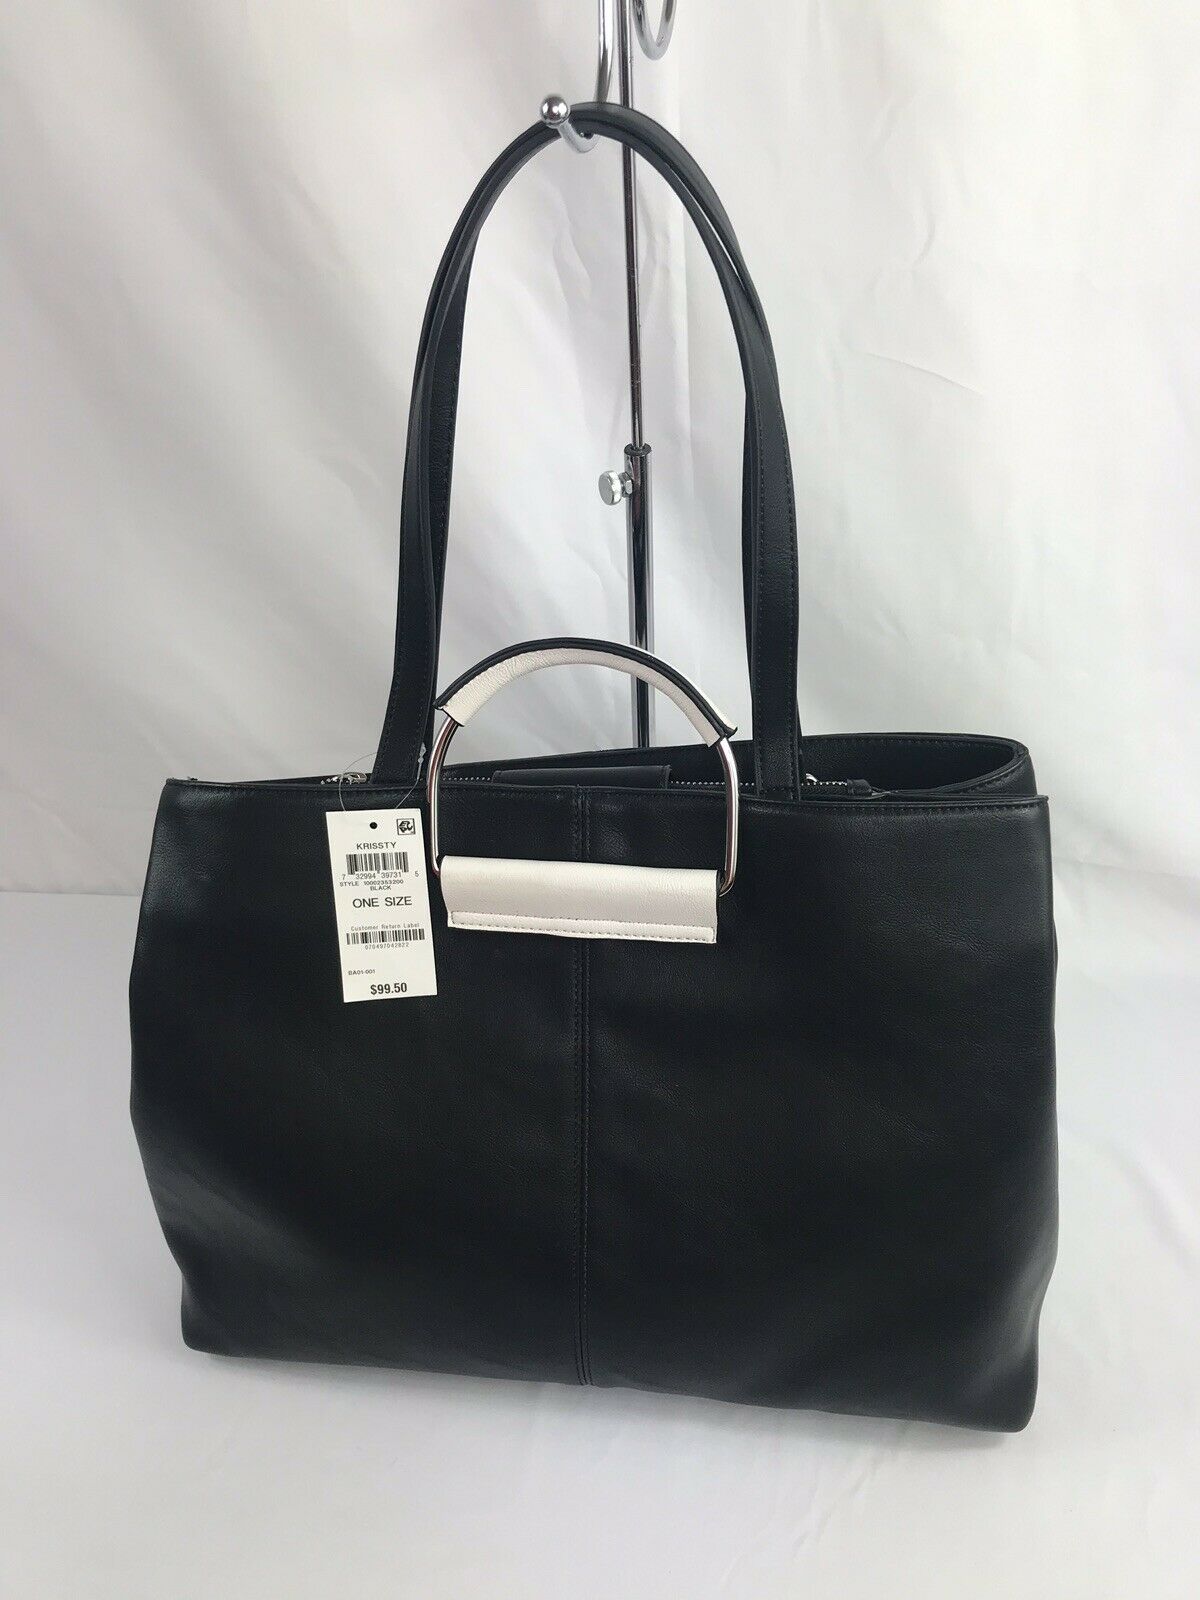 INC International Concepts Krissysty Tote Black ($99.50) - Outlet Designers